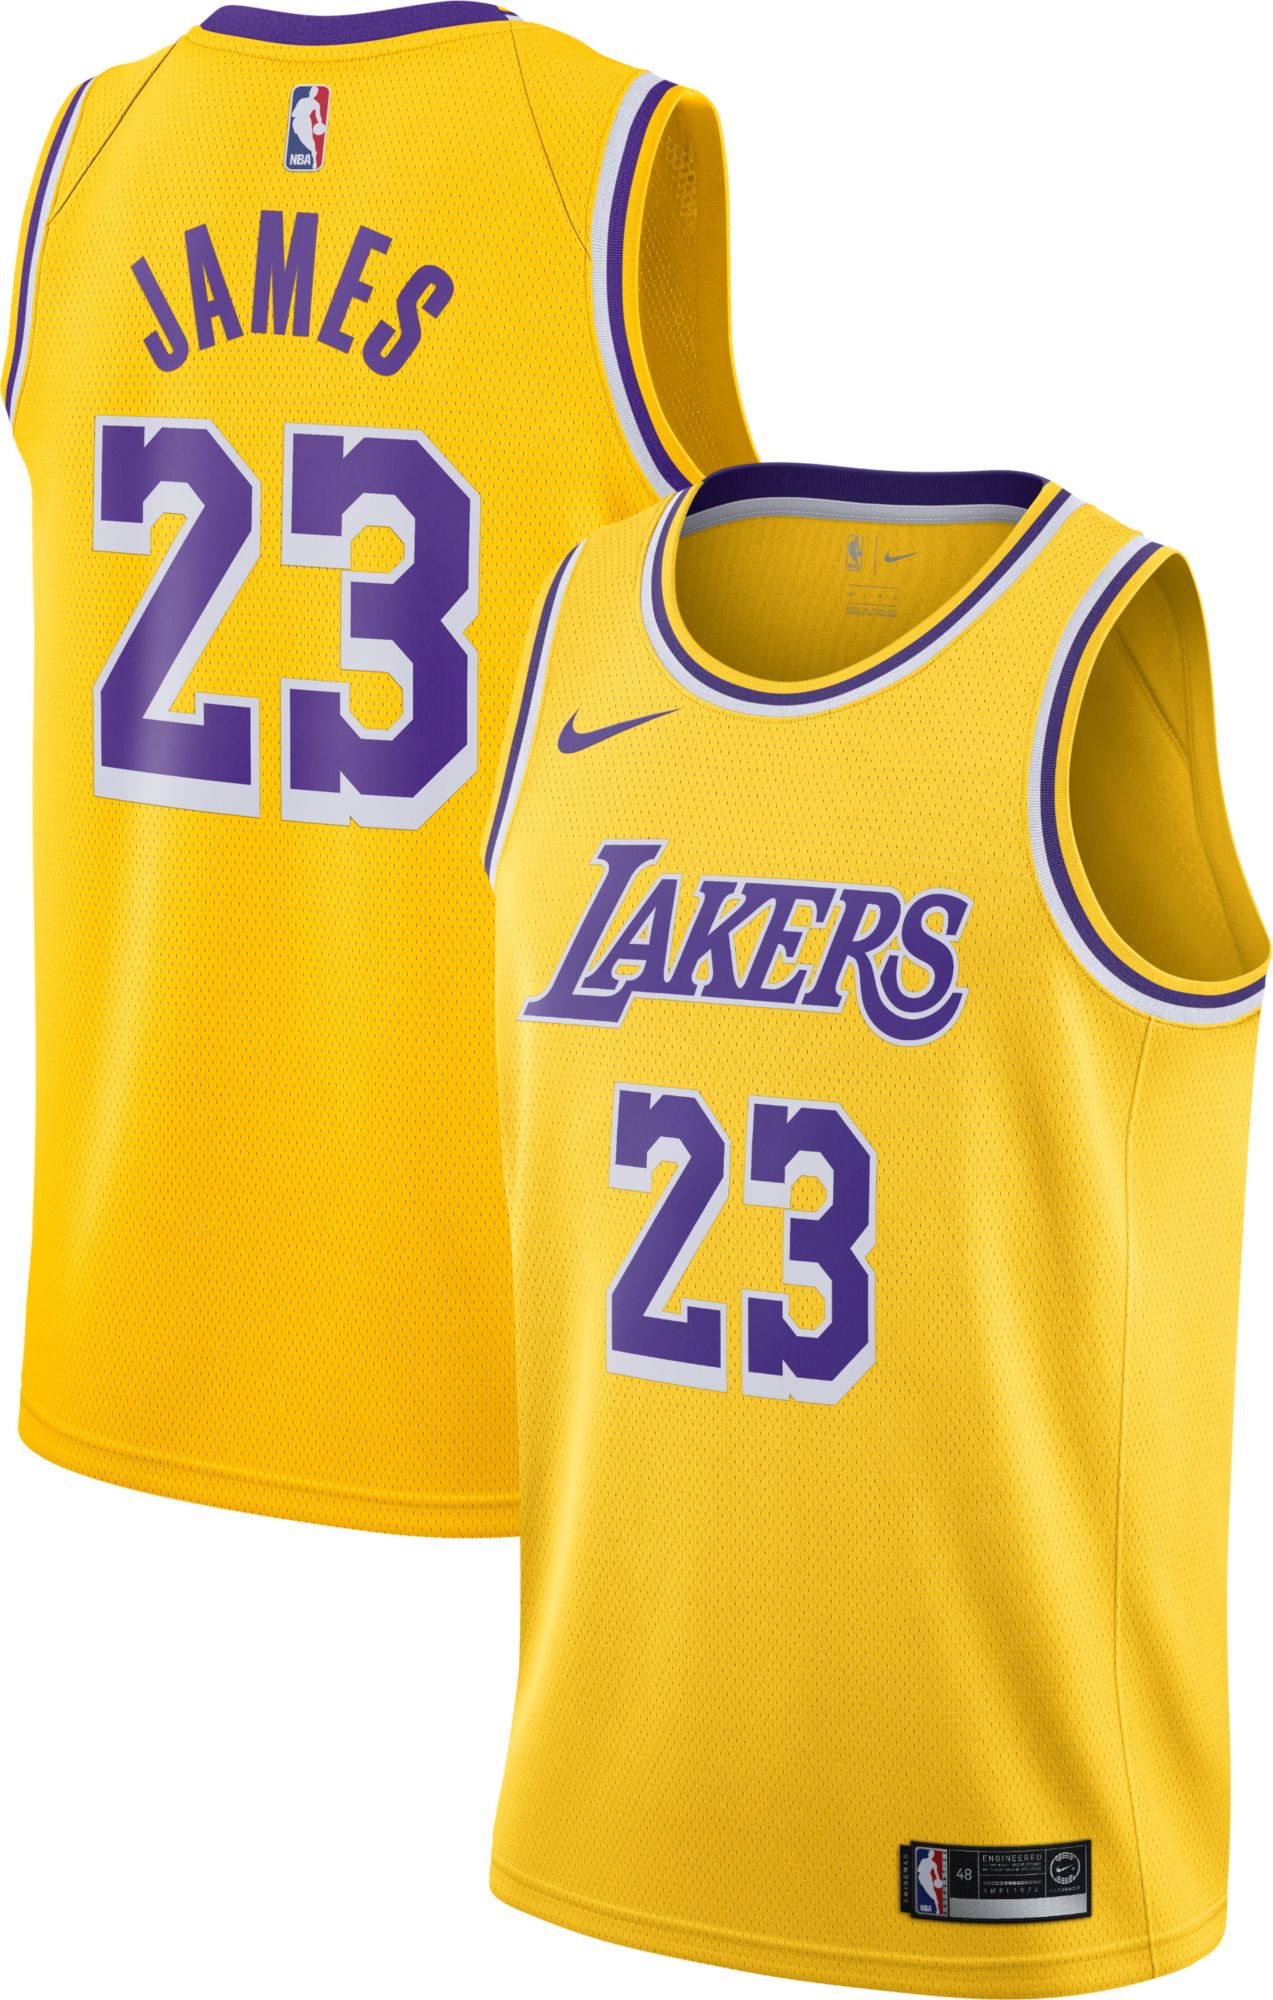 lebron lakers 23 jersey Off 51% - www.bashhguidelines.org